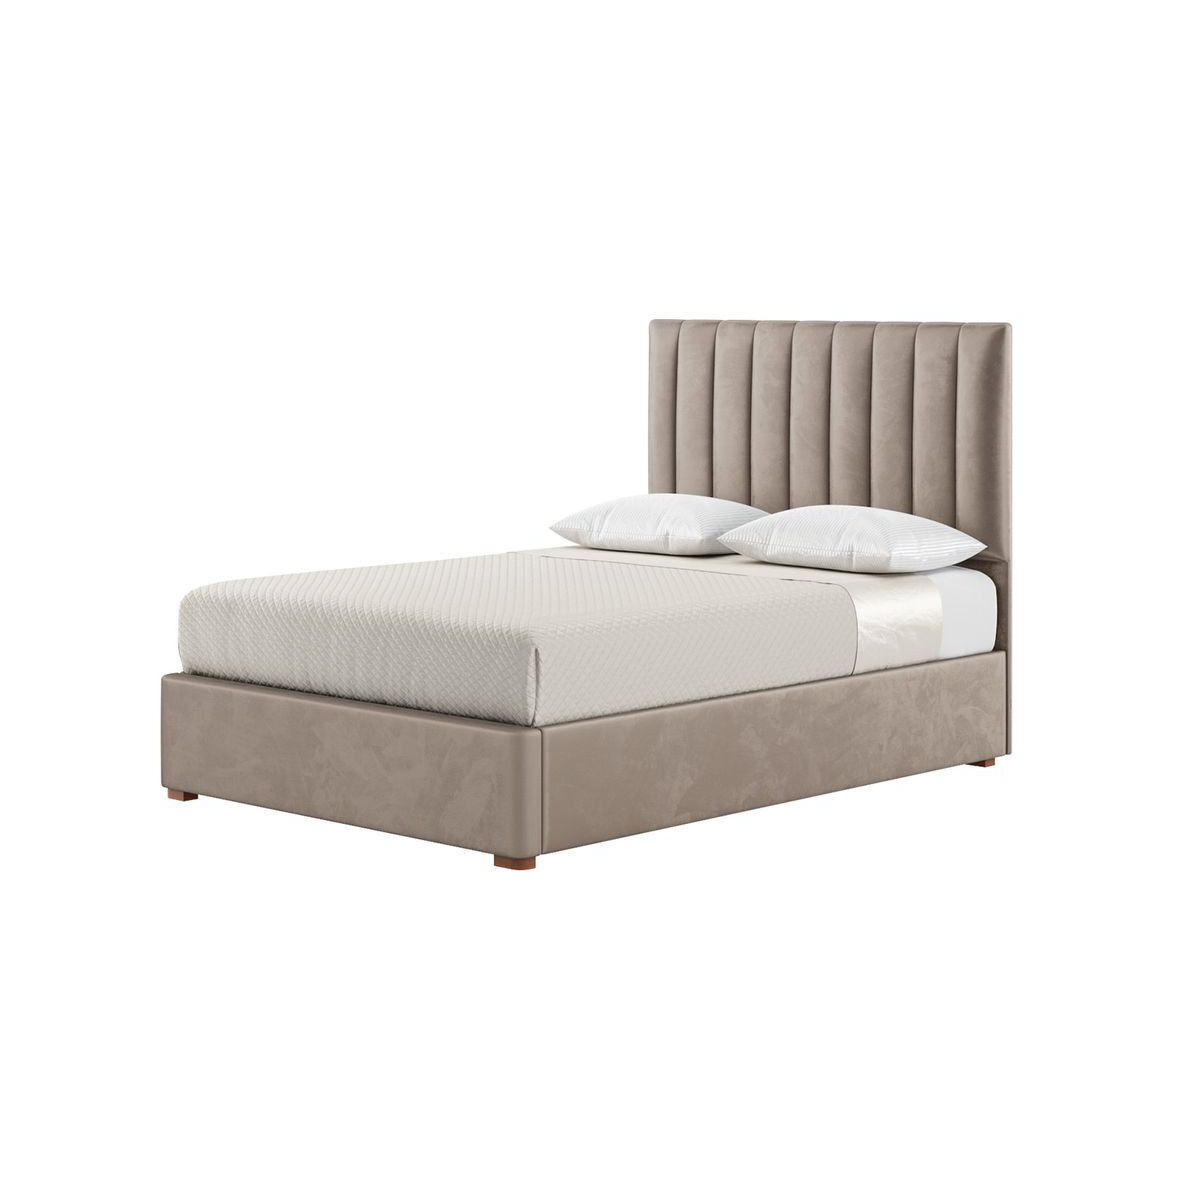 Naomi 4ft6 Double Bed Frame With Fluted Vertical Stitch Headboard, mink, Leg colour: aveo - image 1